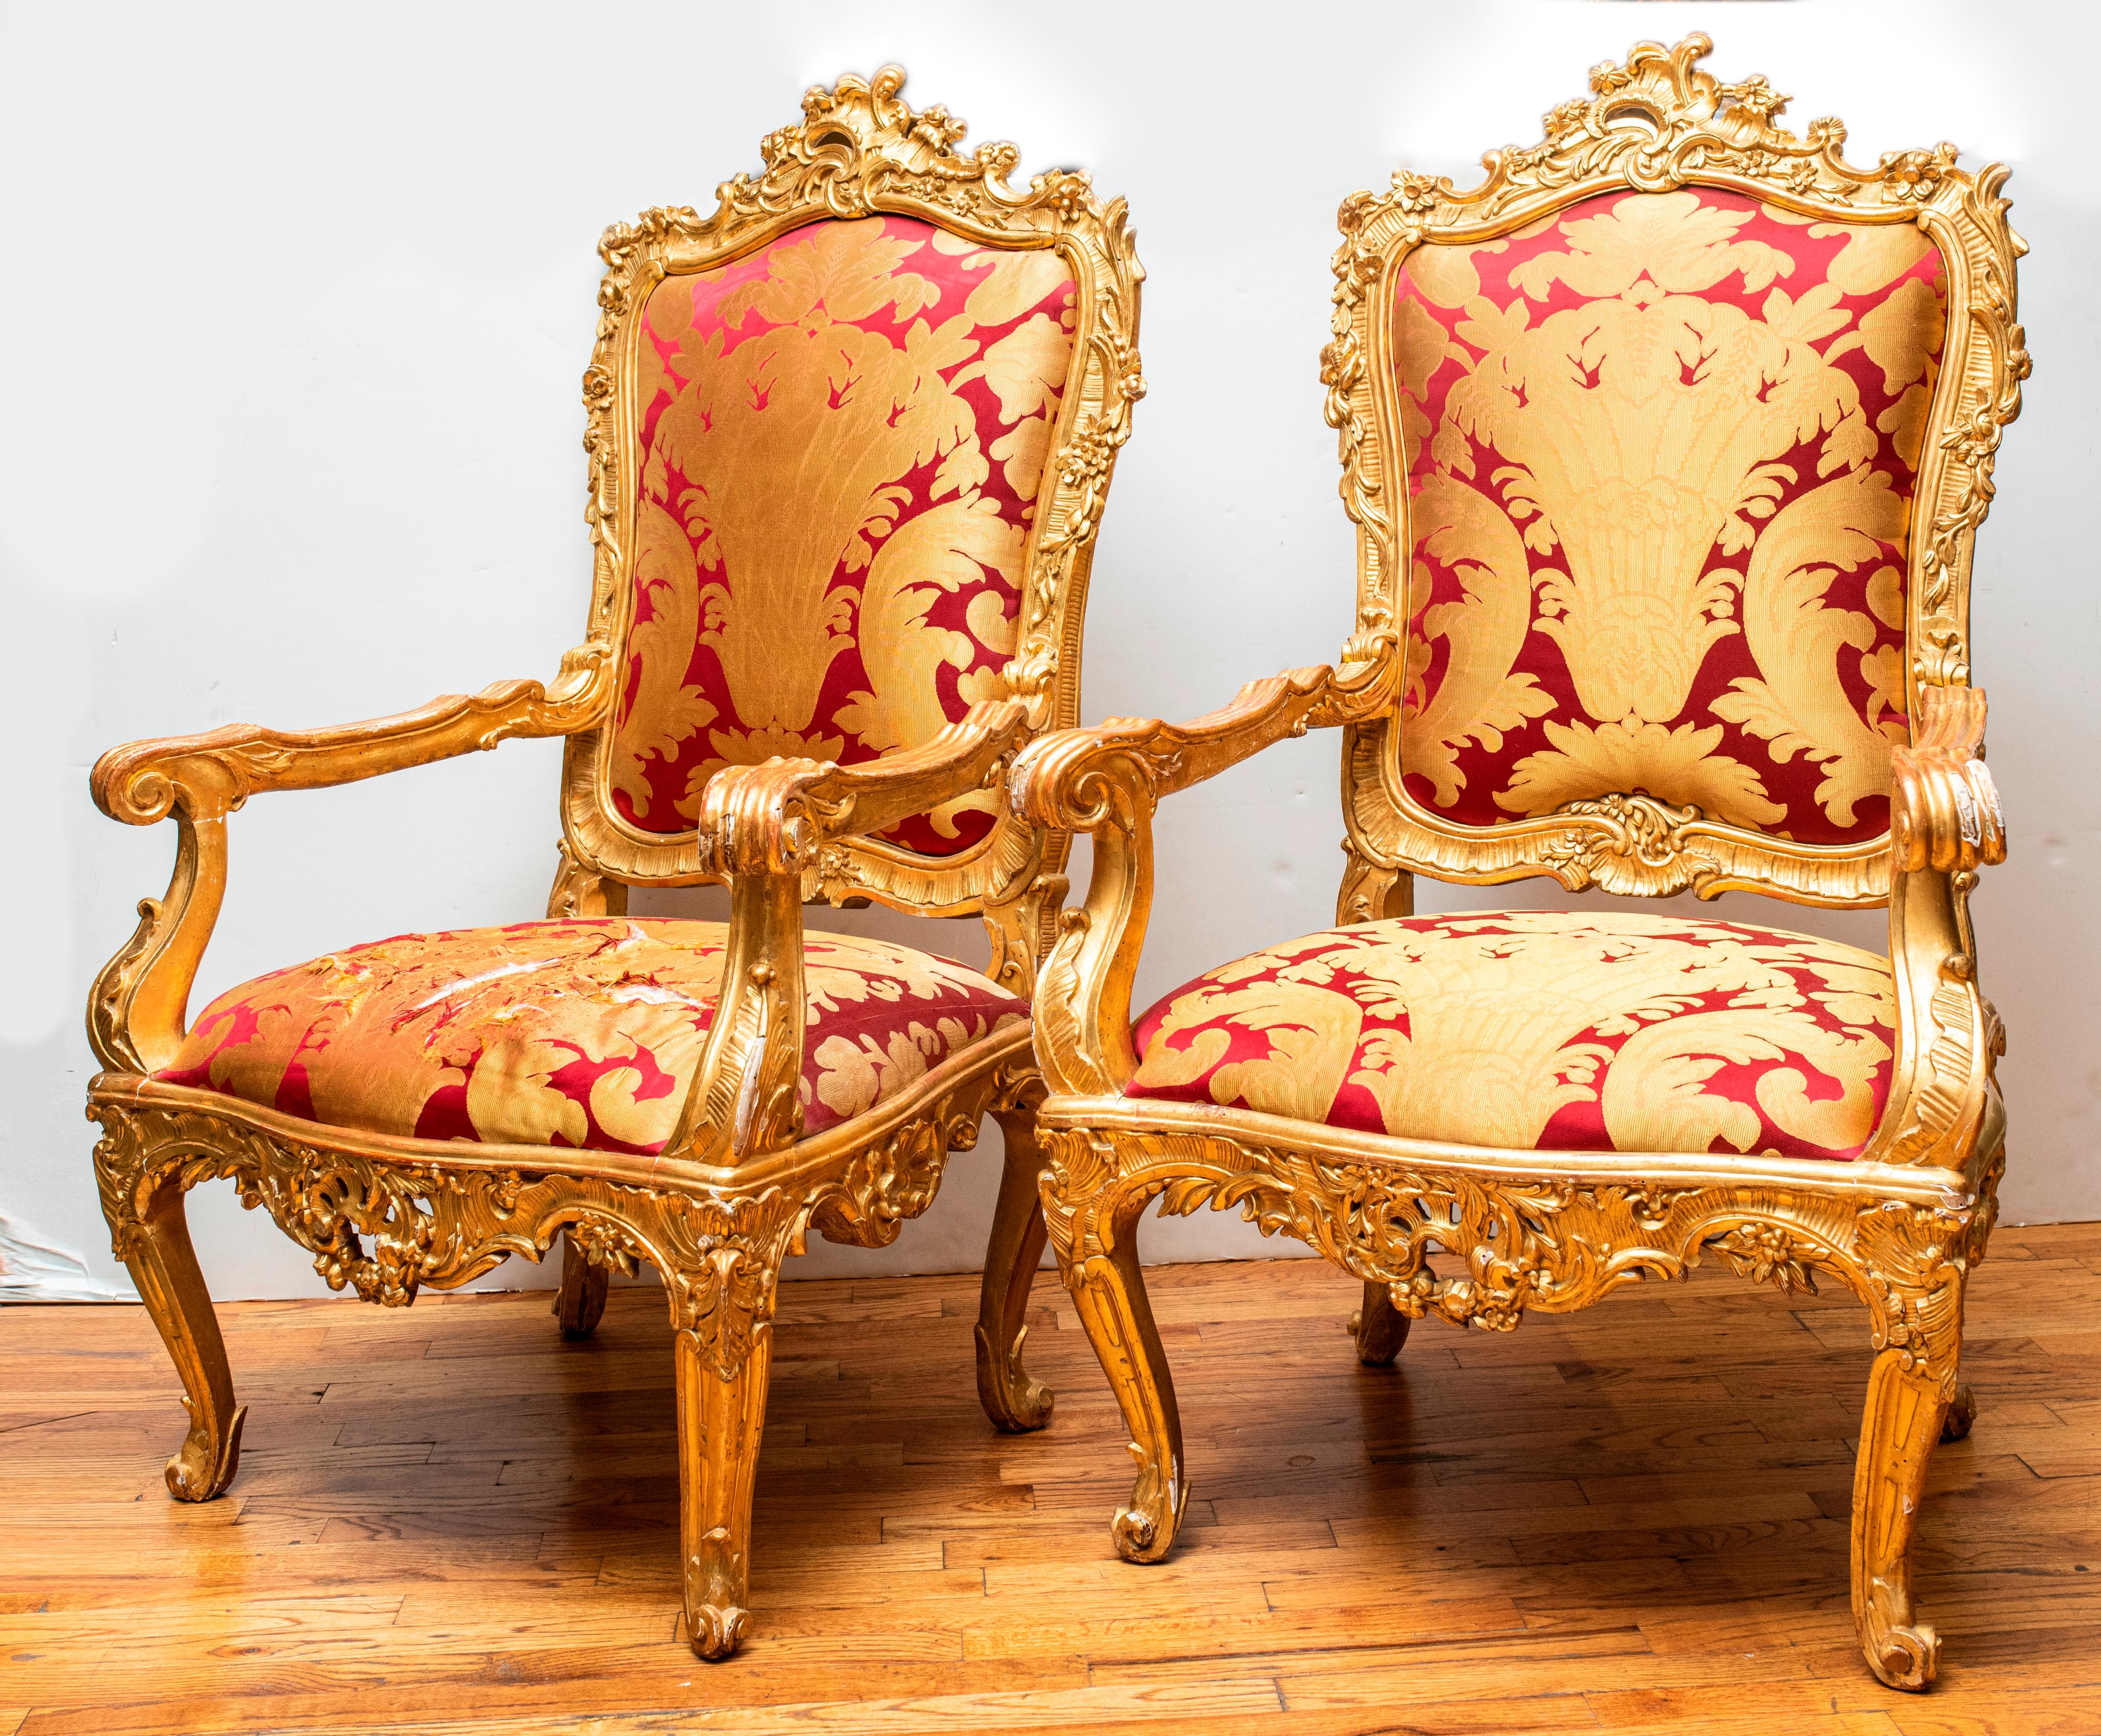 Italian Rococo period pair of ornate carved giltwood throne armchairs with upholstery, mid-18th century. Tears to seat upholstery on one chair. Measures: 52.5